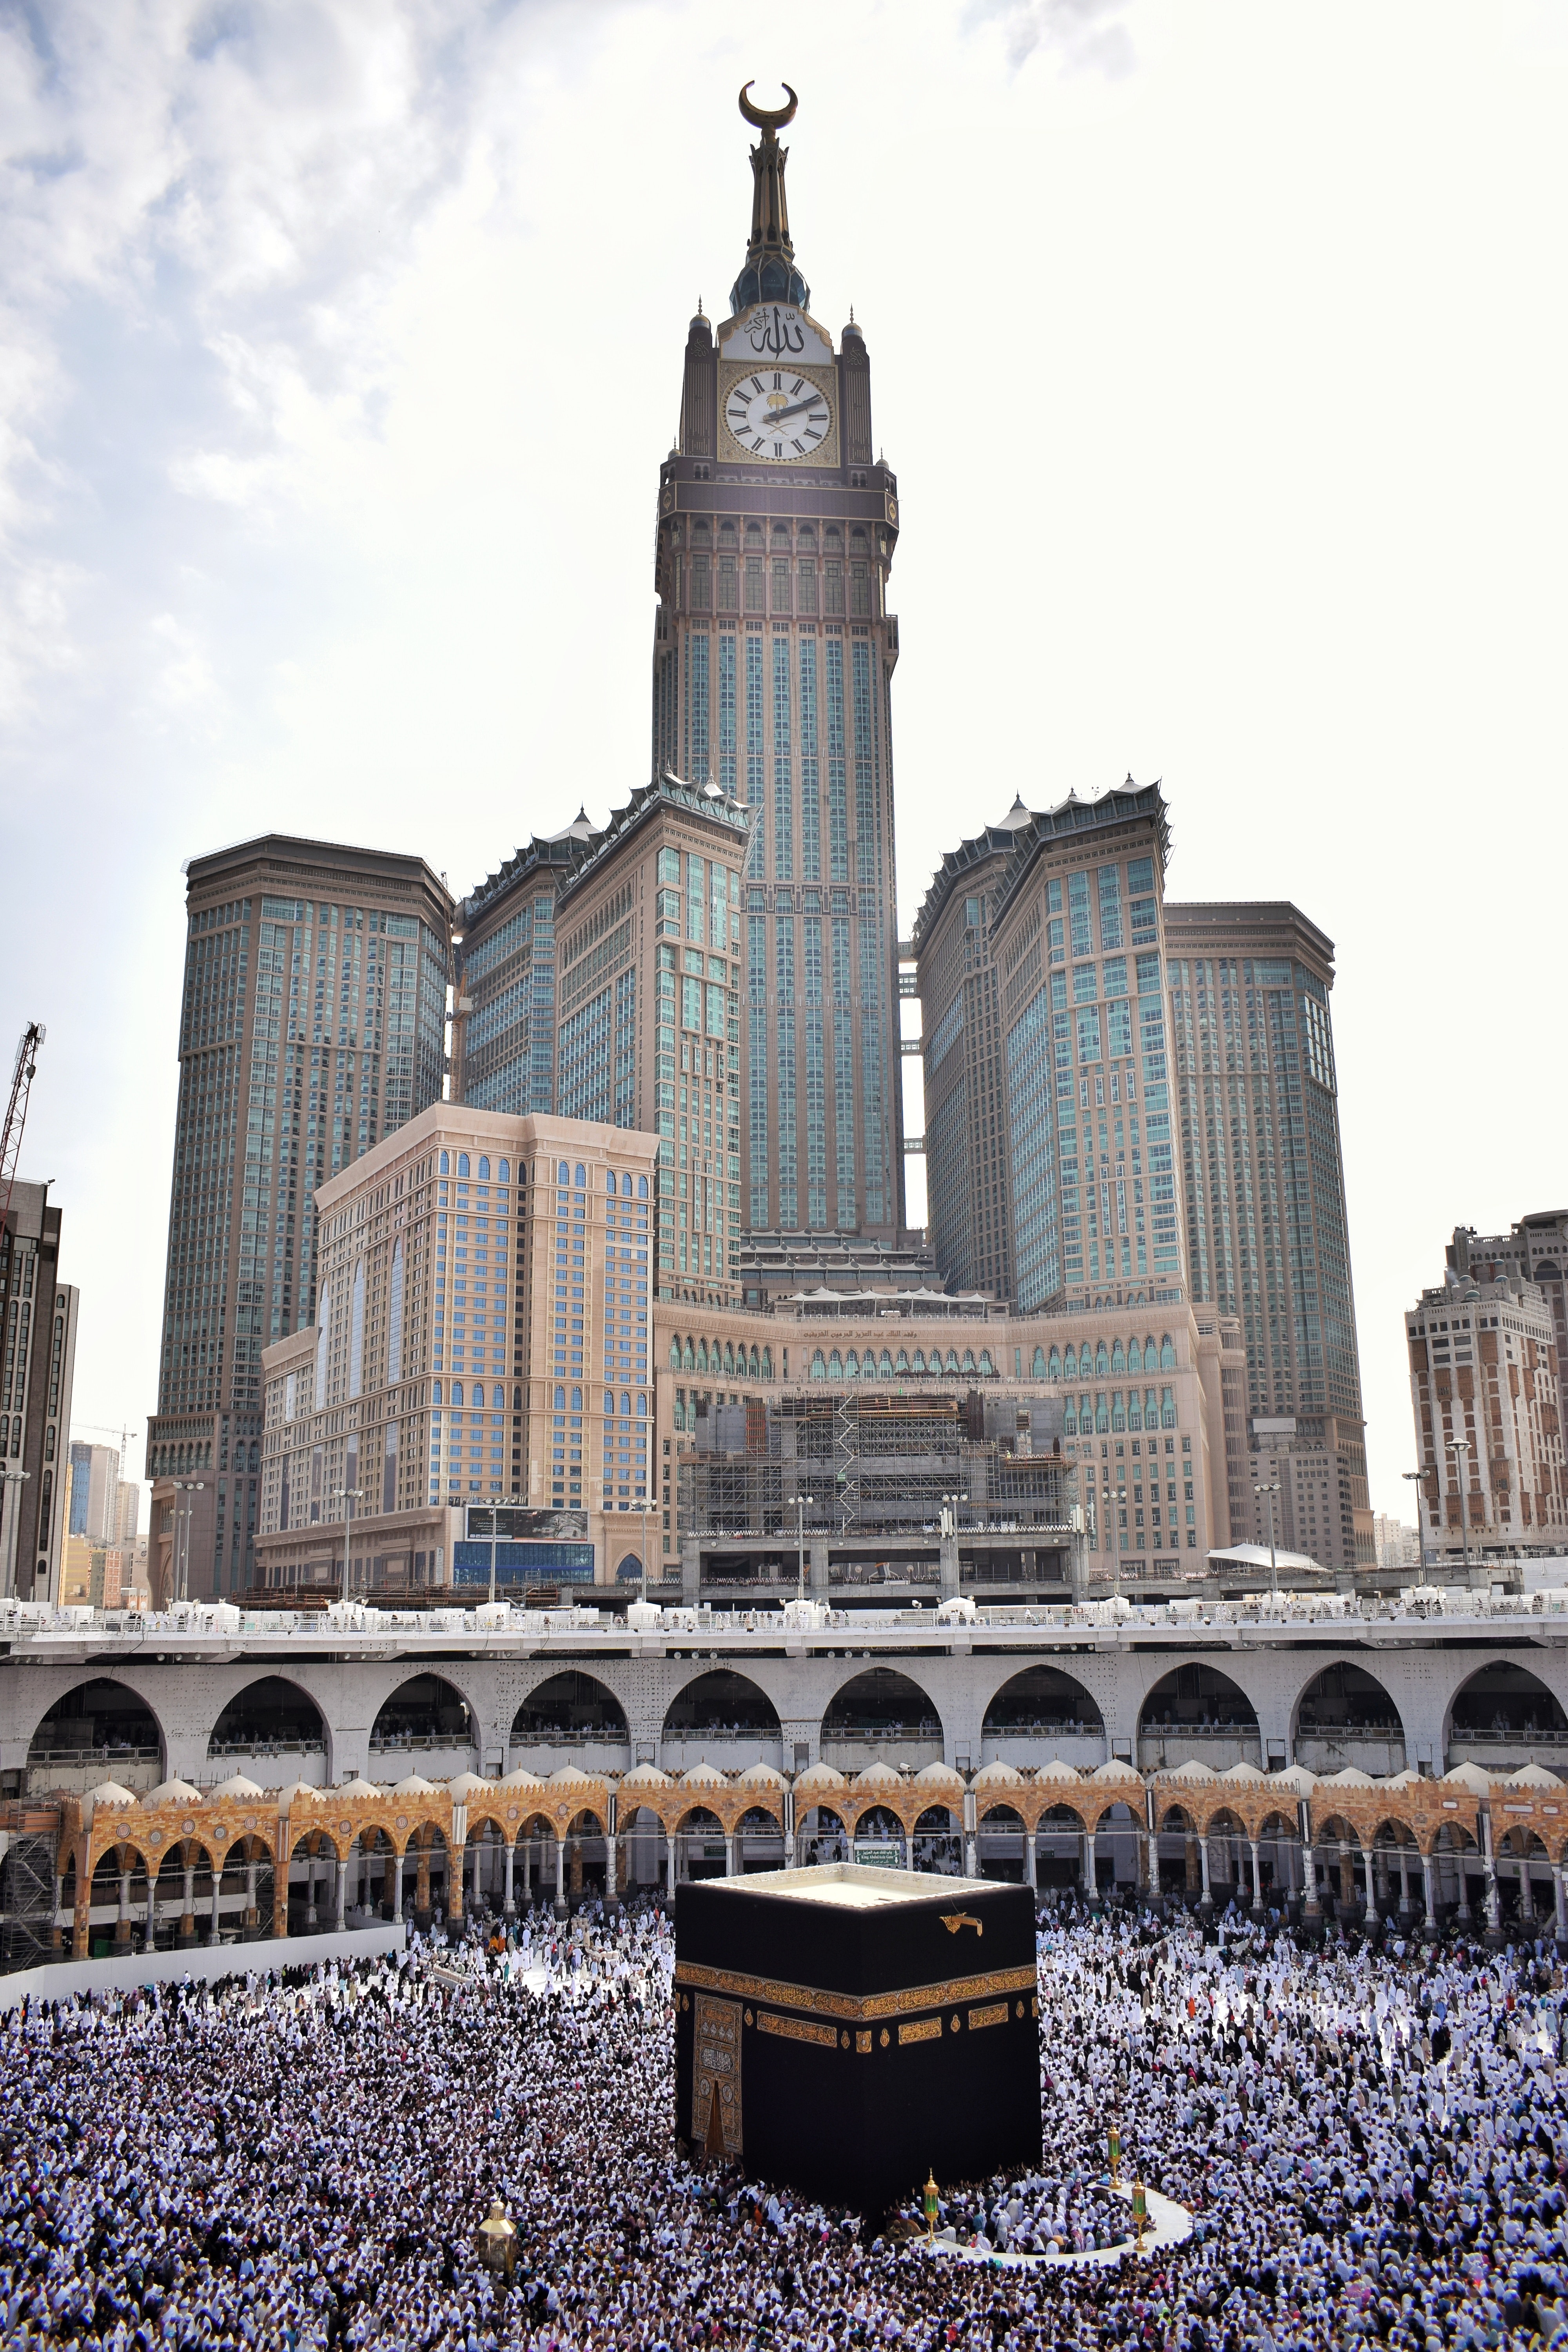 Mecca photos download the best free mecca stock photos hd images